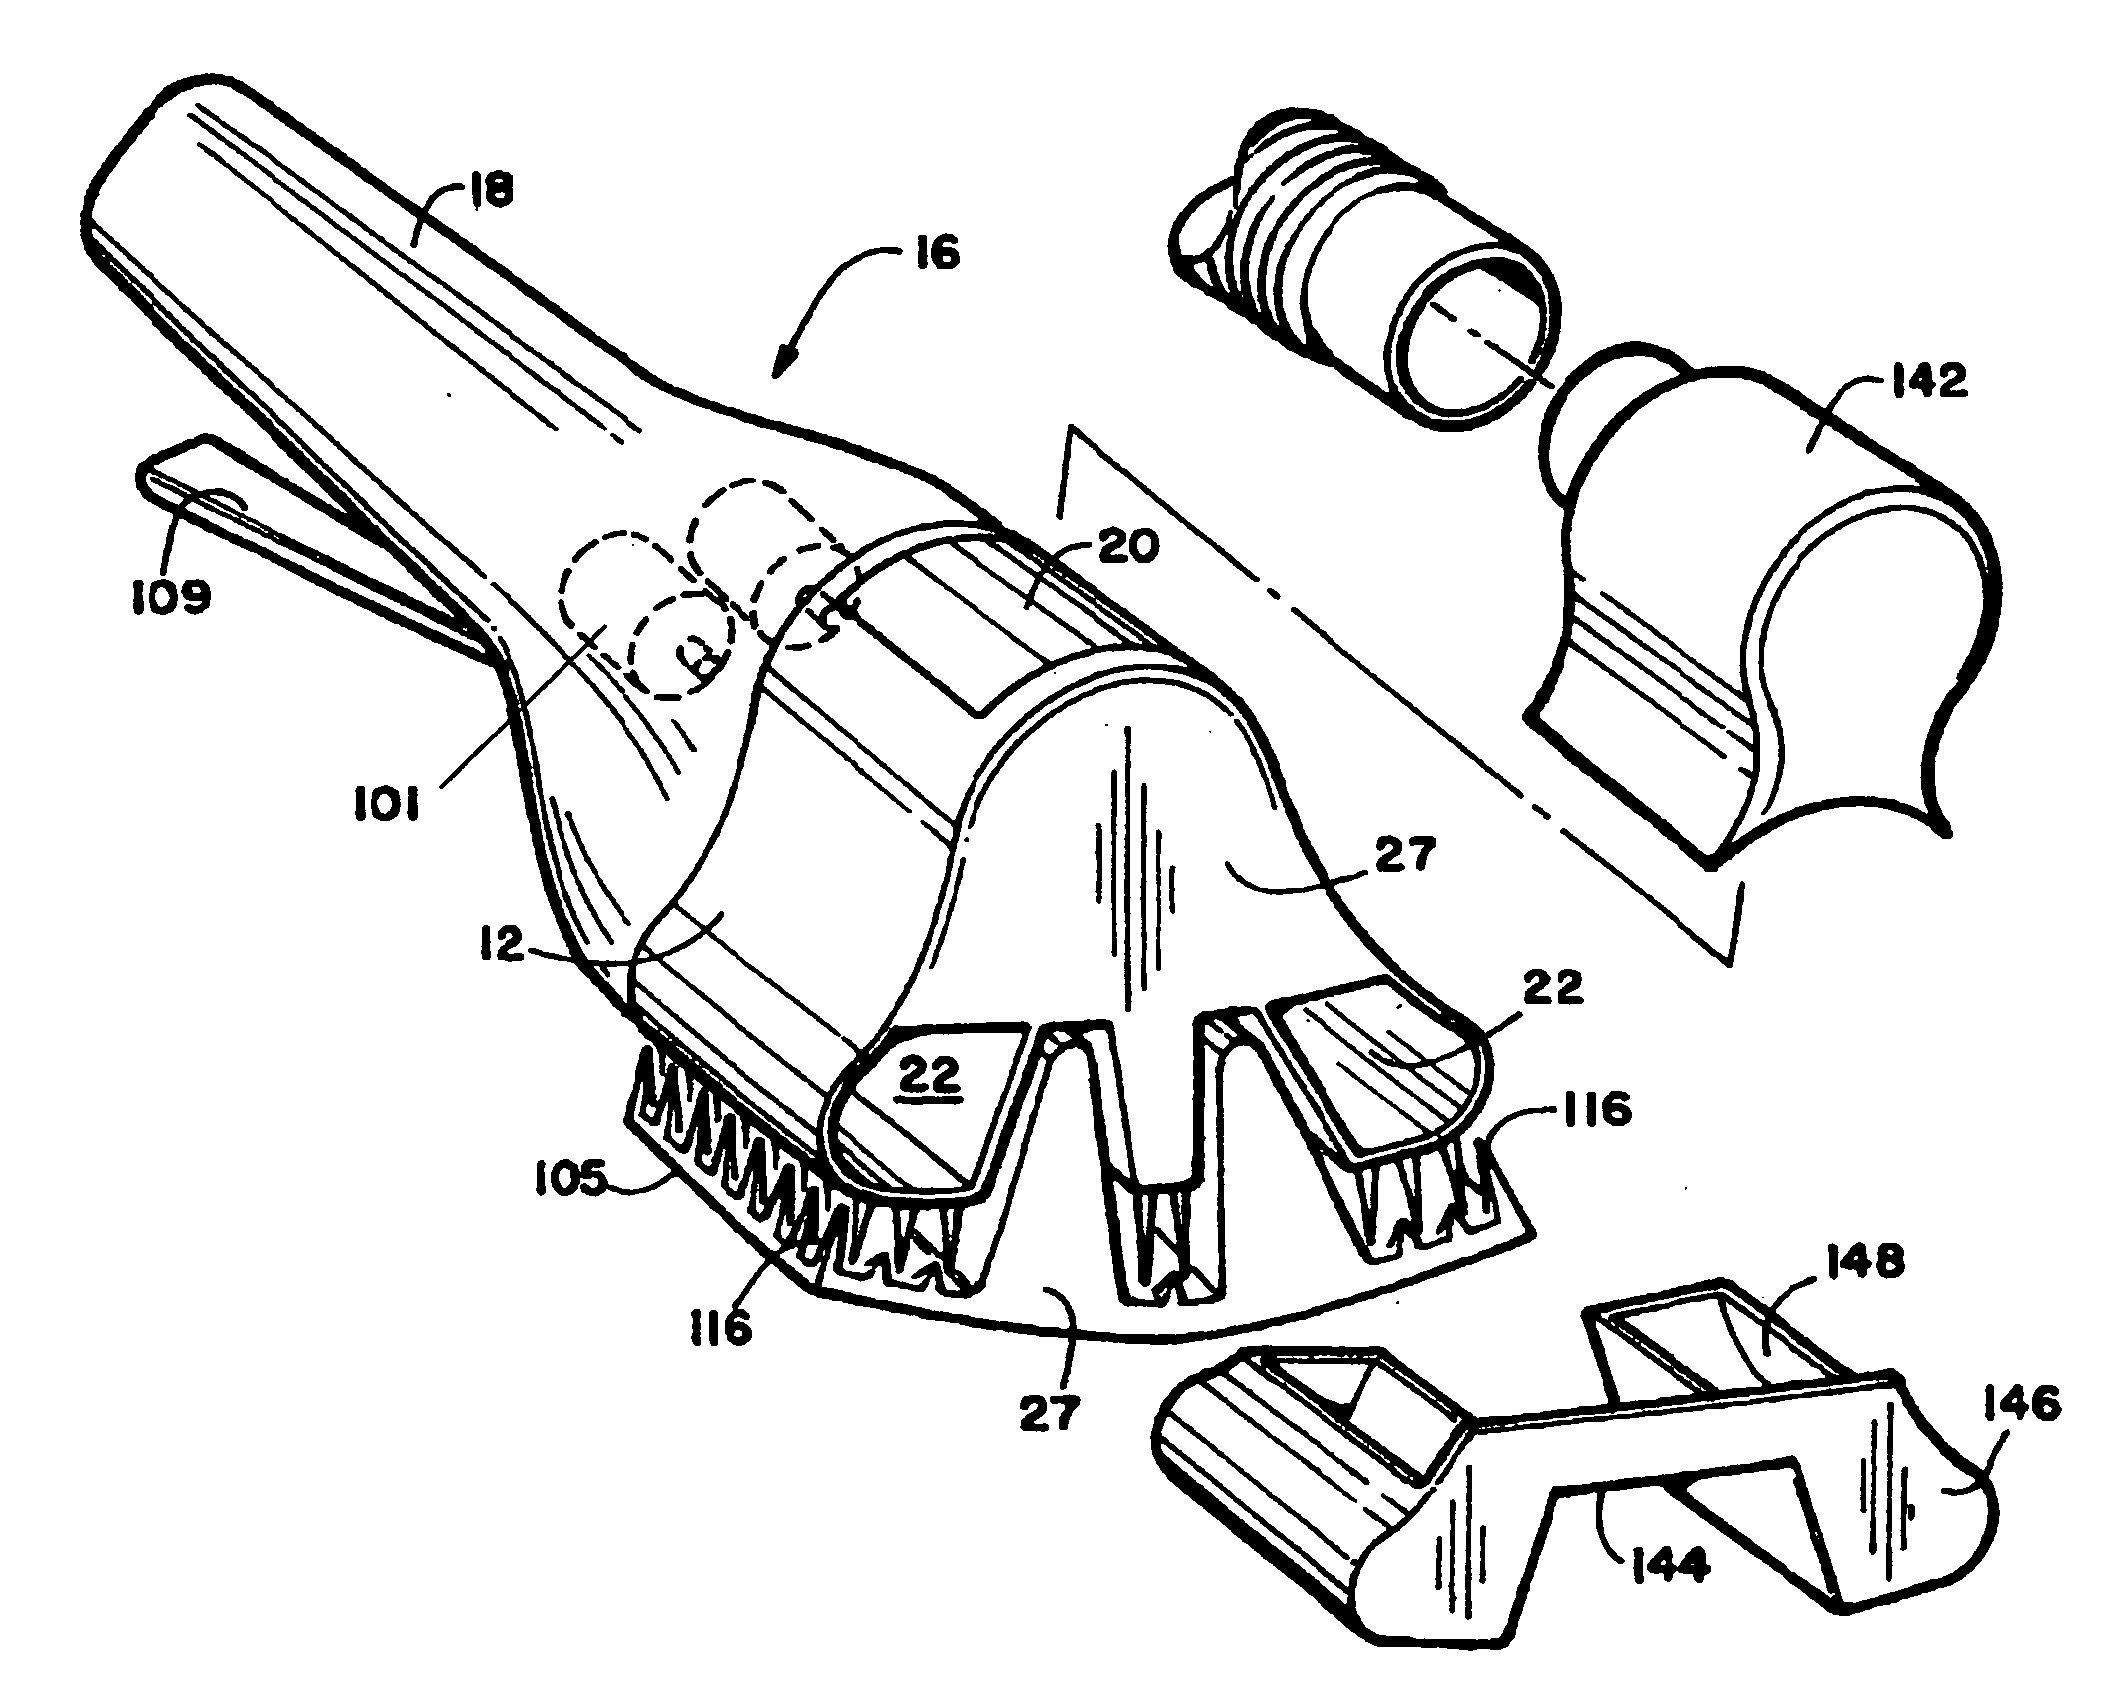 Hair trimming device with removably mountable components for removal of split ends and styling of hair